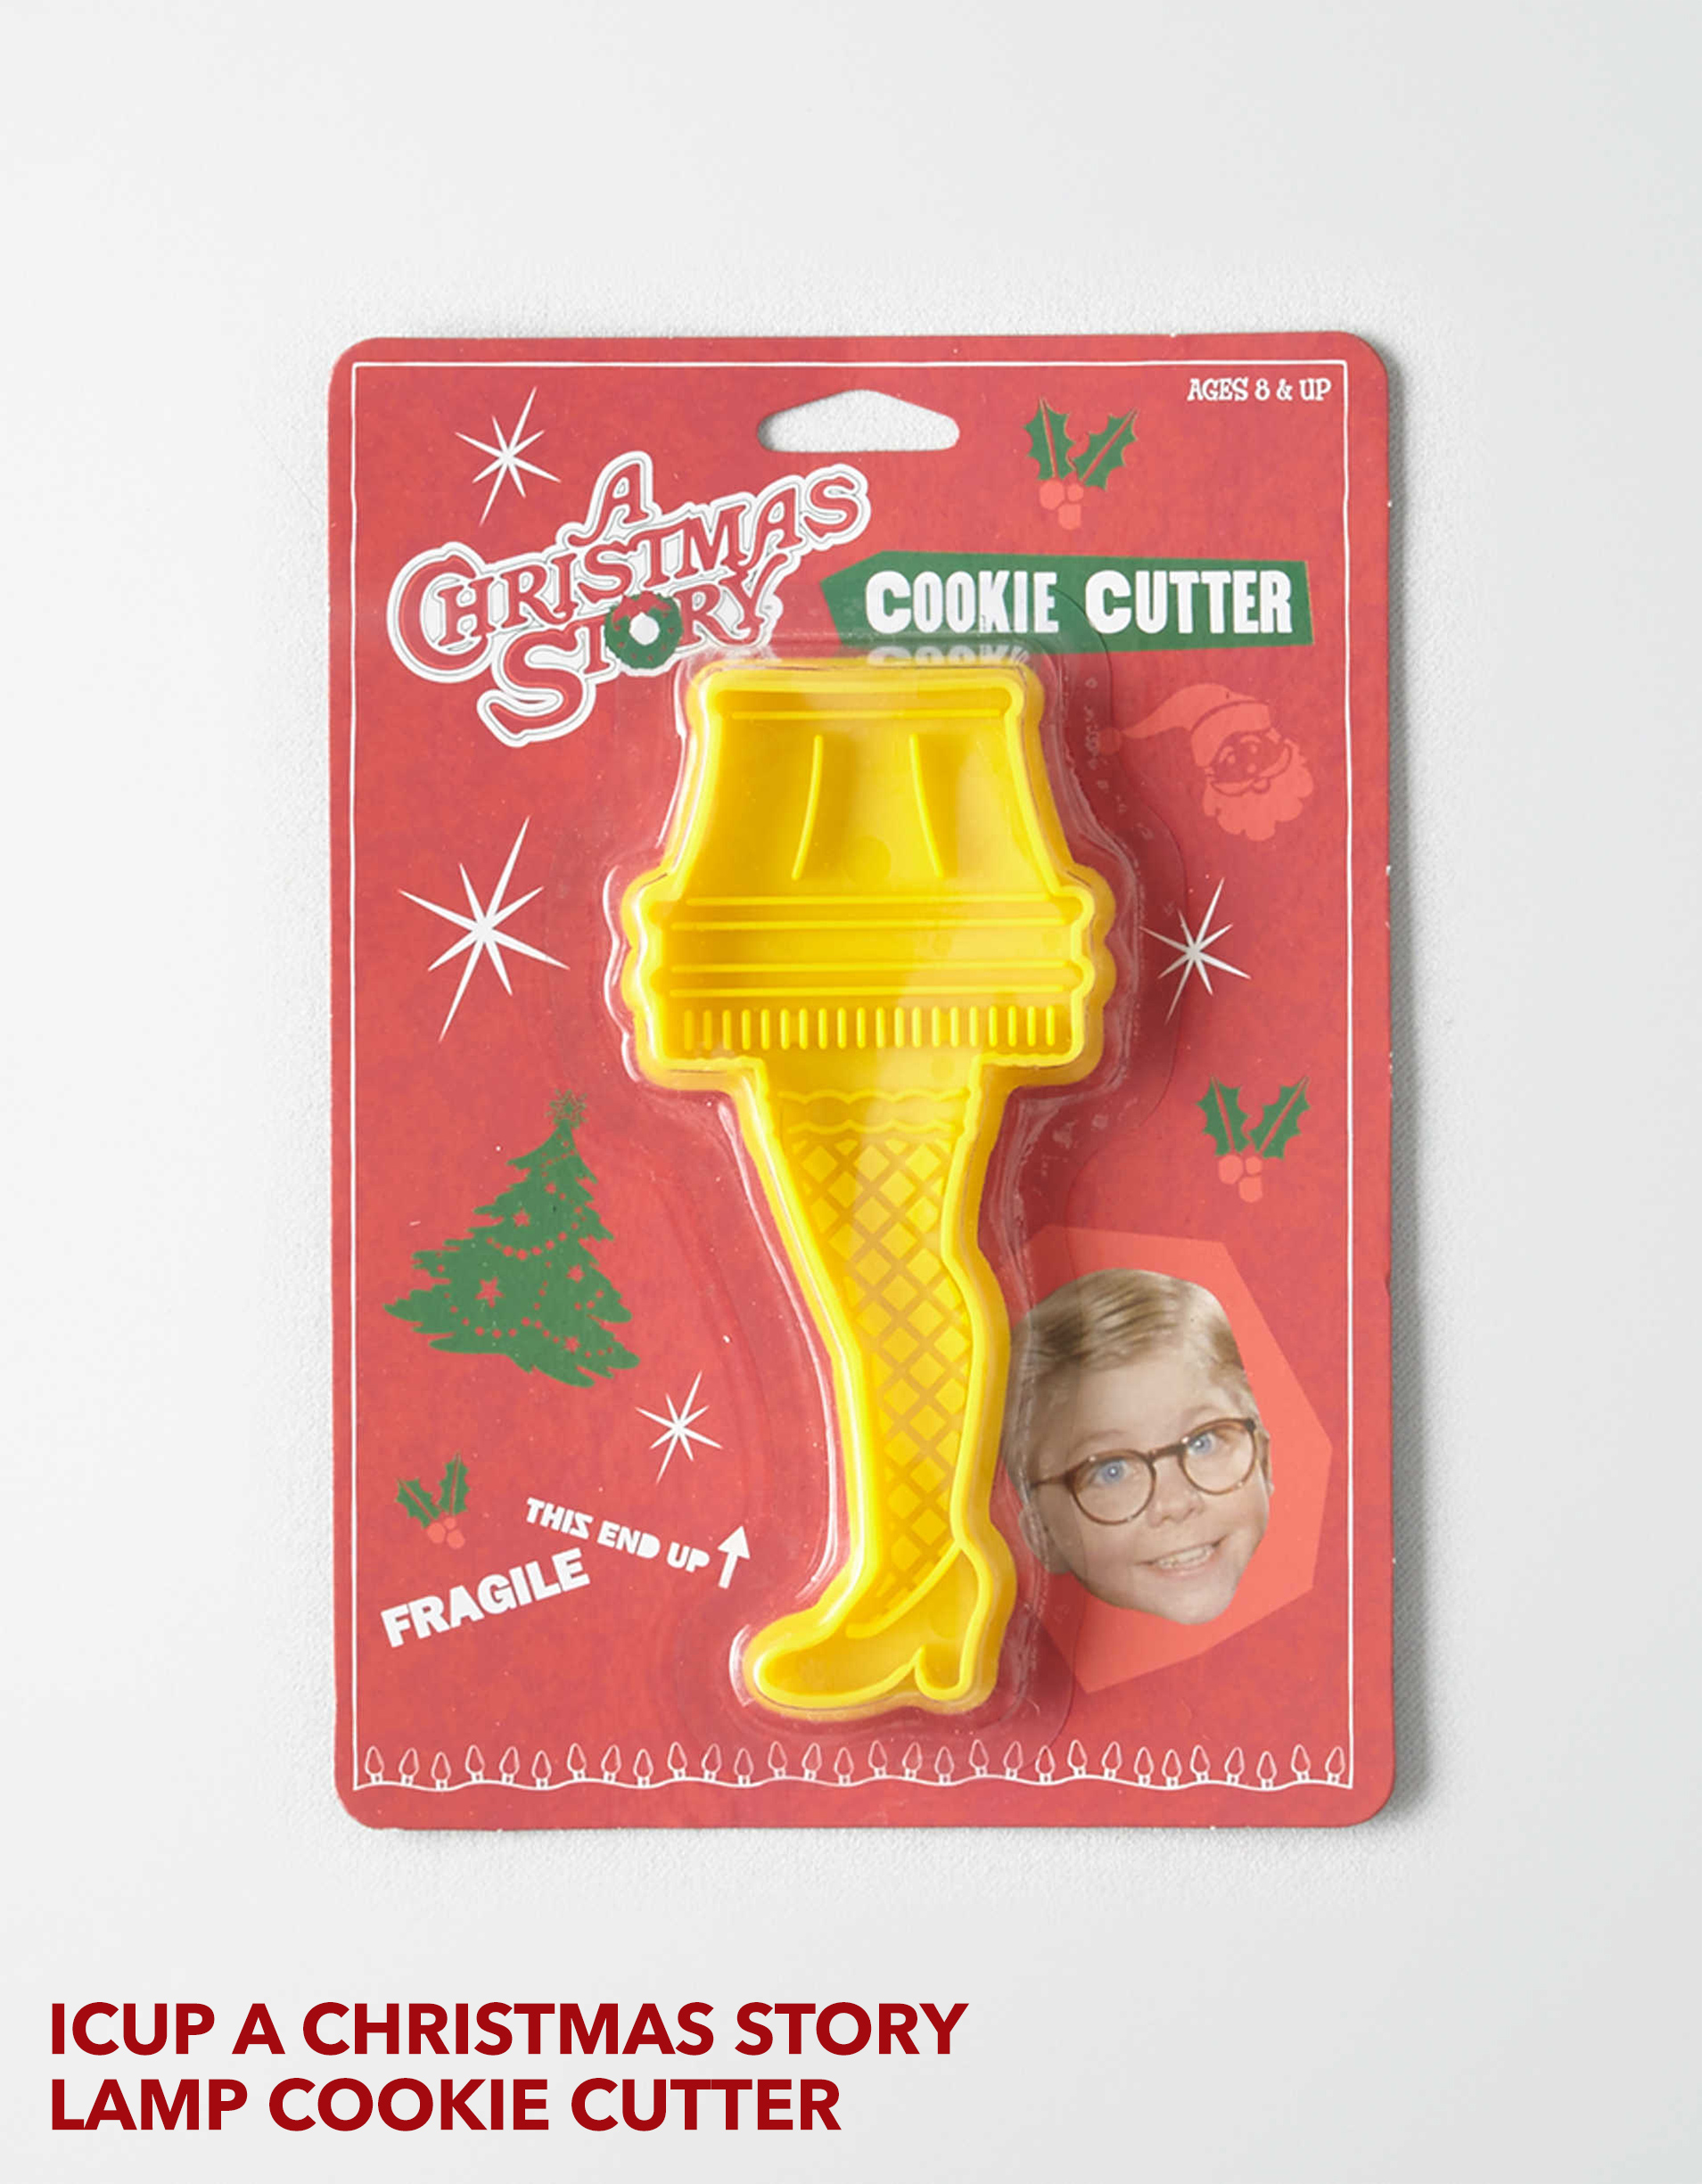 ICUP A CHRISTMAS STORY LAMP COOKIE CUTTER